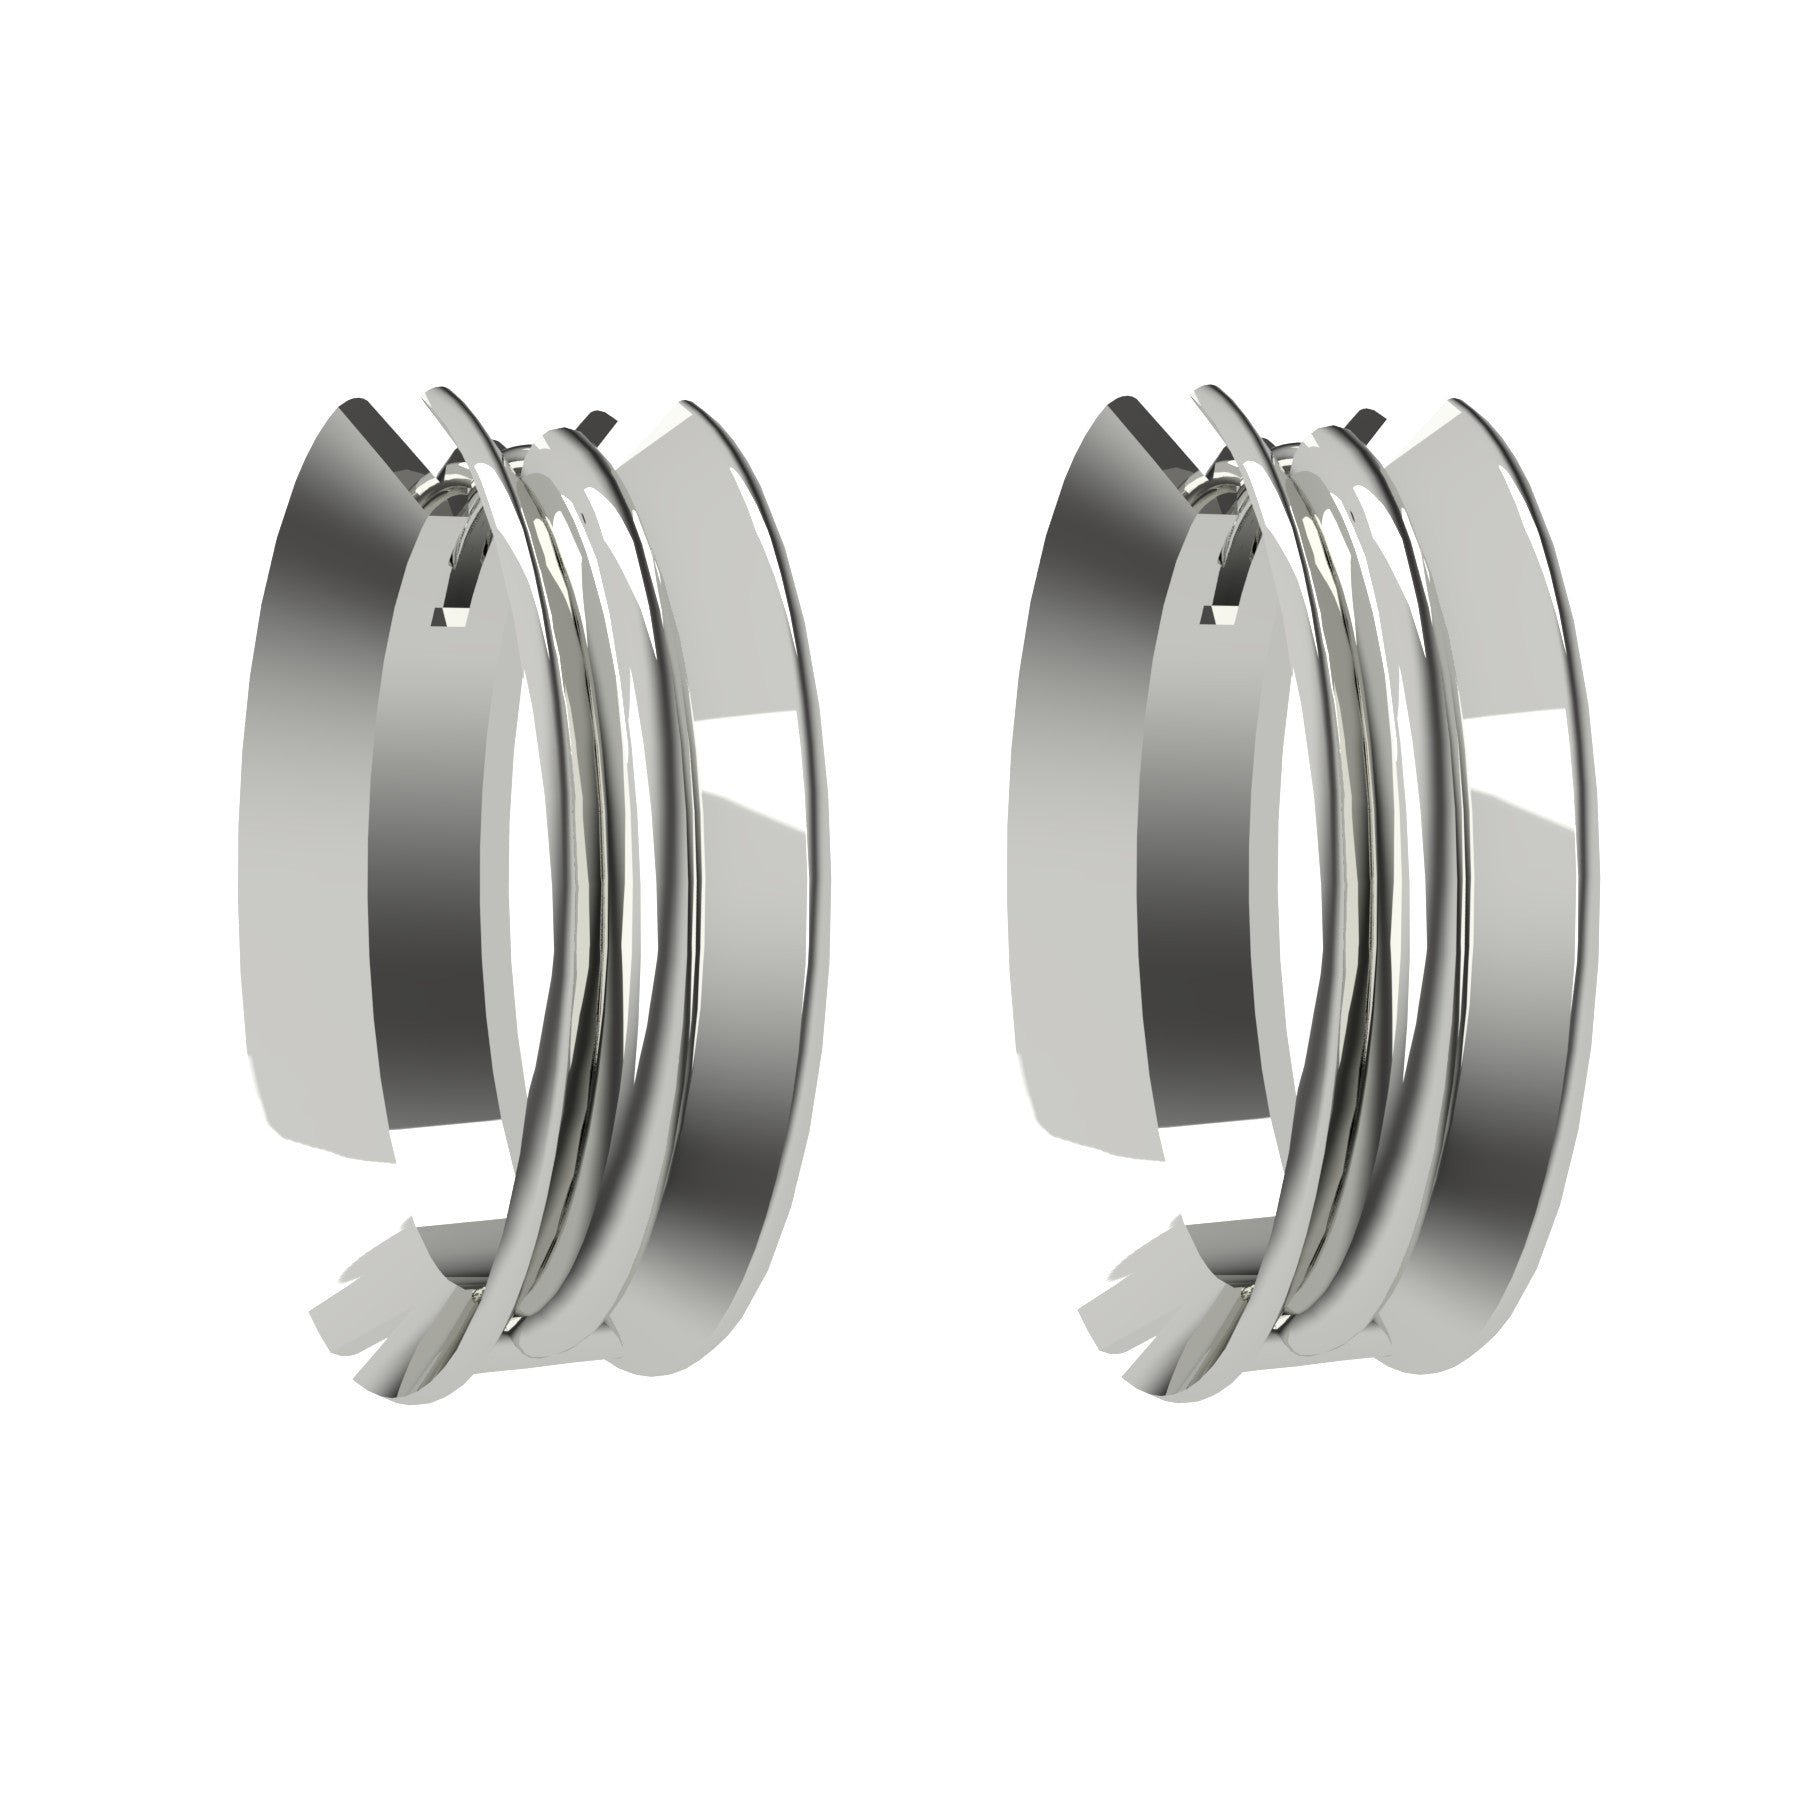 bobo oval earrings, 18 K white gold, weight about 10,9 g (0.38 oz), size 23,5x13,8x8 mm 